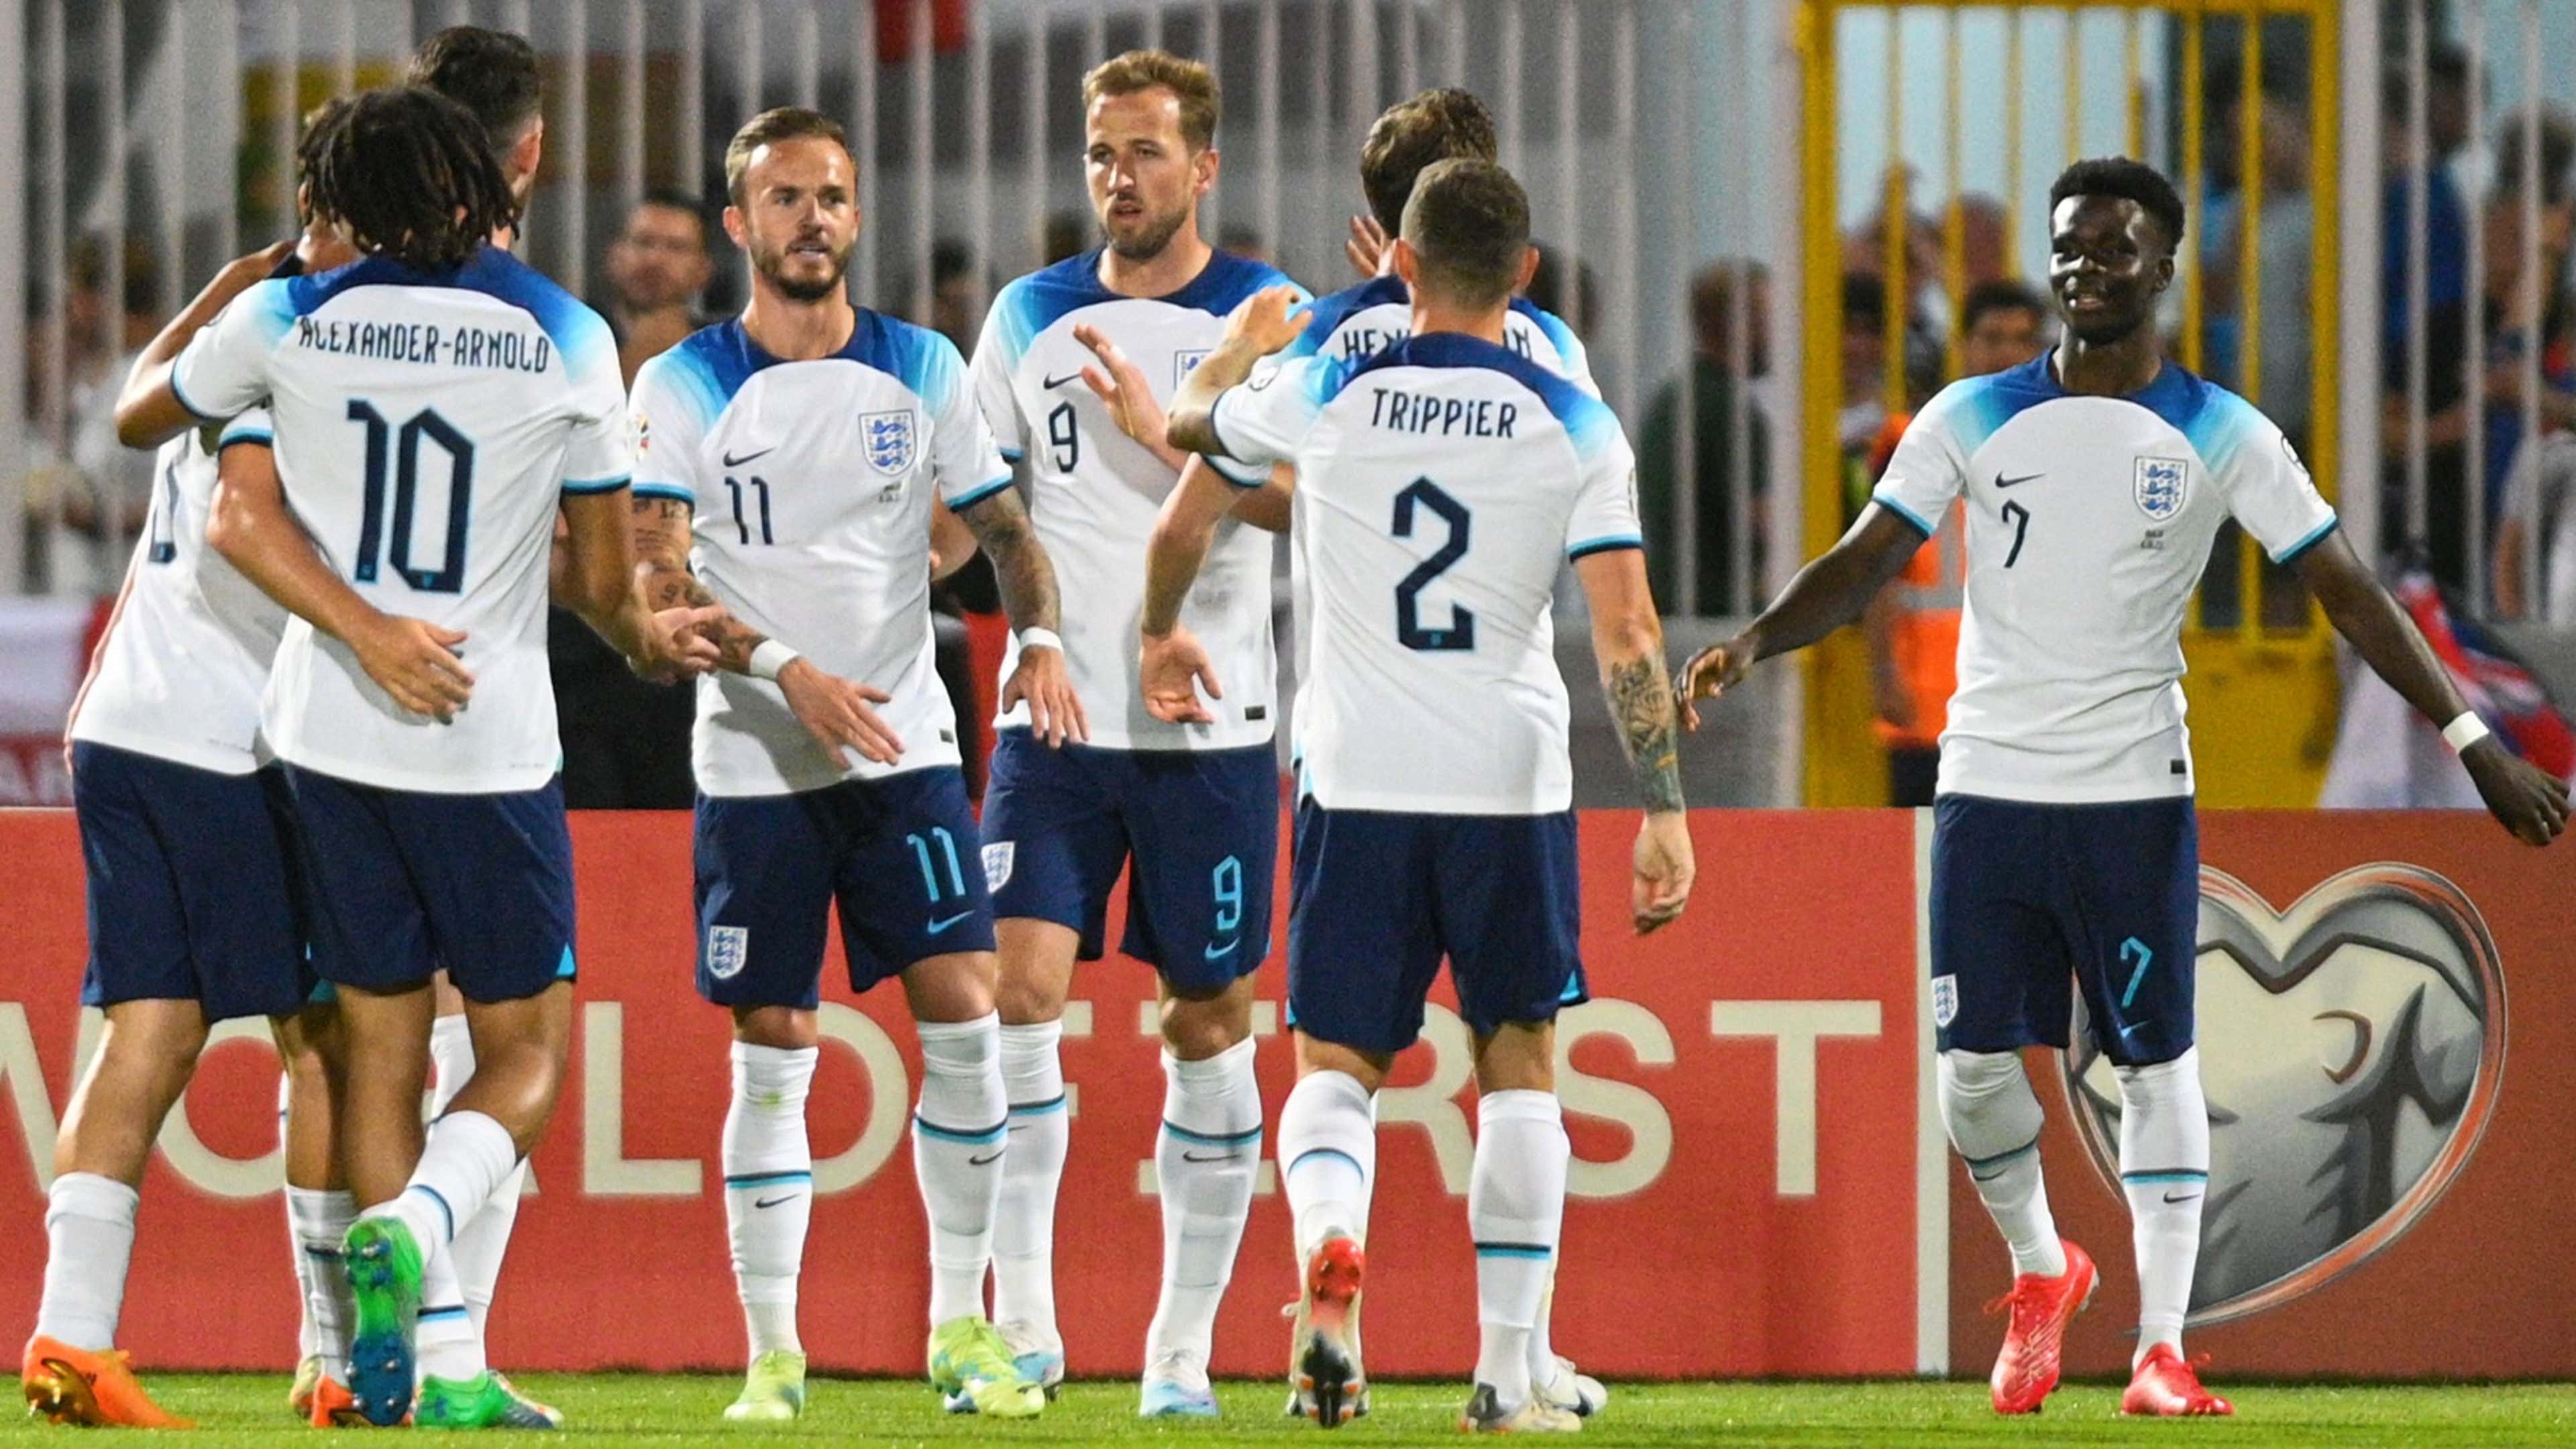 England vs N. Macedonia Where to watch the match online, live stream